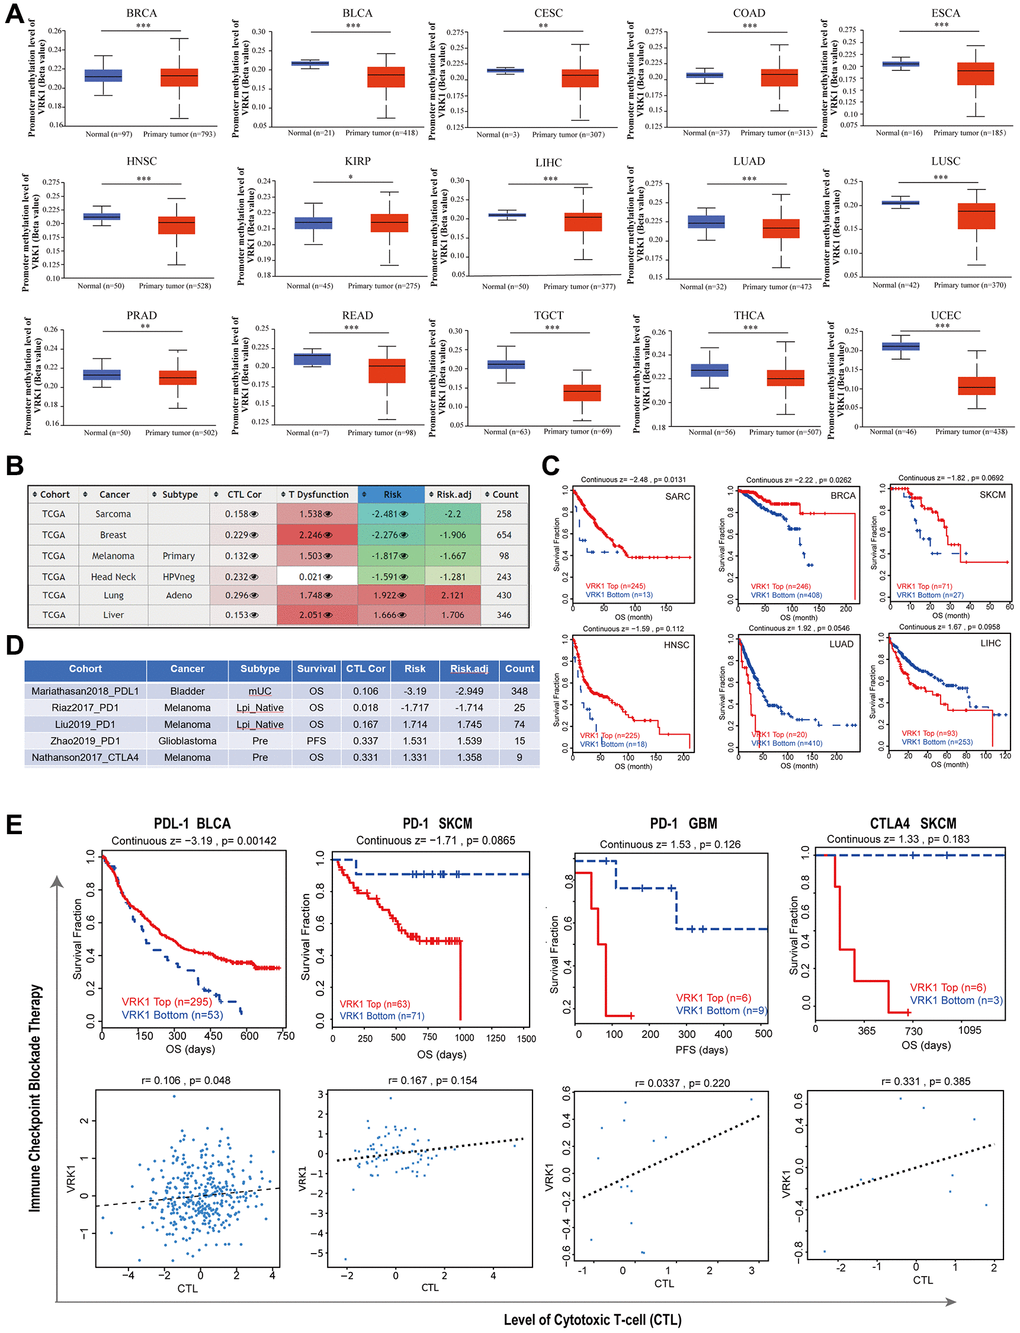 Correlation analysis with methylation profile. (A) Boxplots showing differential VRK1 methylation levels (beta values) between tumors and adjacent tissues across the TCGA dataset. (B) Heatmap showing the roles of VRK1 methylation in cytotoxic T-cell levels (CTLs), dysfunctional T-cell phenotypes, and risk factors of TCGA cancer cohorts. (C) Kaplan-Meier curves of OS differences between TCGA cancer cohorts with high methylation levels and those with low methylation levels of VRK1. (D, E) The upper panel displays Kaplan-Meier curves illustrating the survival ratios of cancer cohorts with high and low expression levels of VRK1 as a measure of the immunotherapeutic response (immune checkpoint blockade). The lower panel presents the correlation between VRK1 expression levels and cytotoxic T-cell levels (CTL) in these cohorts. Only statistically significant differences between the cohorts in TCGA cancers are included in the analysis.